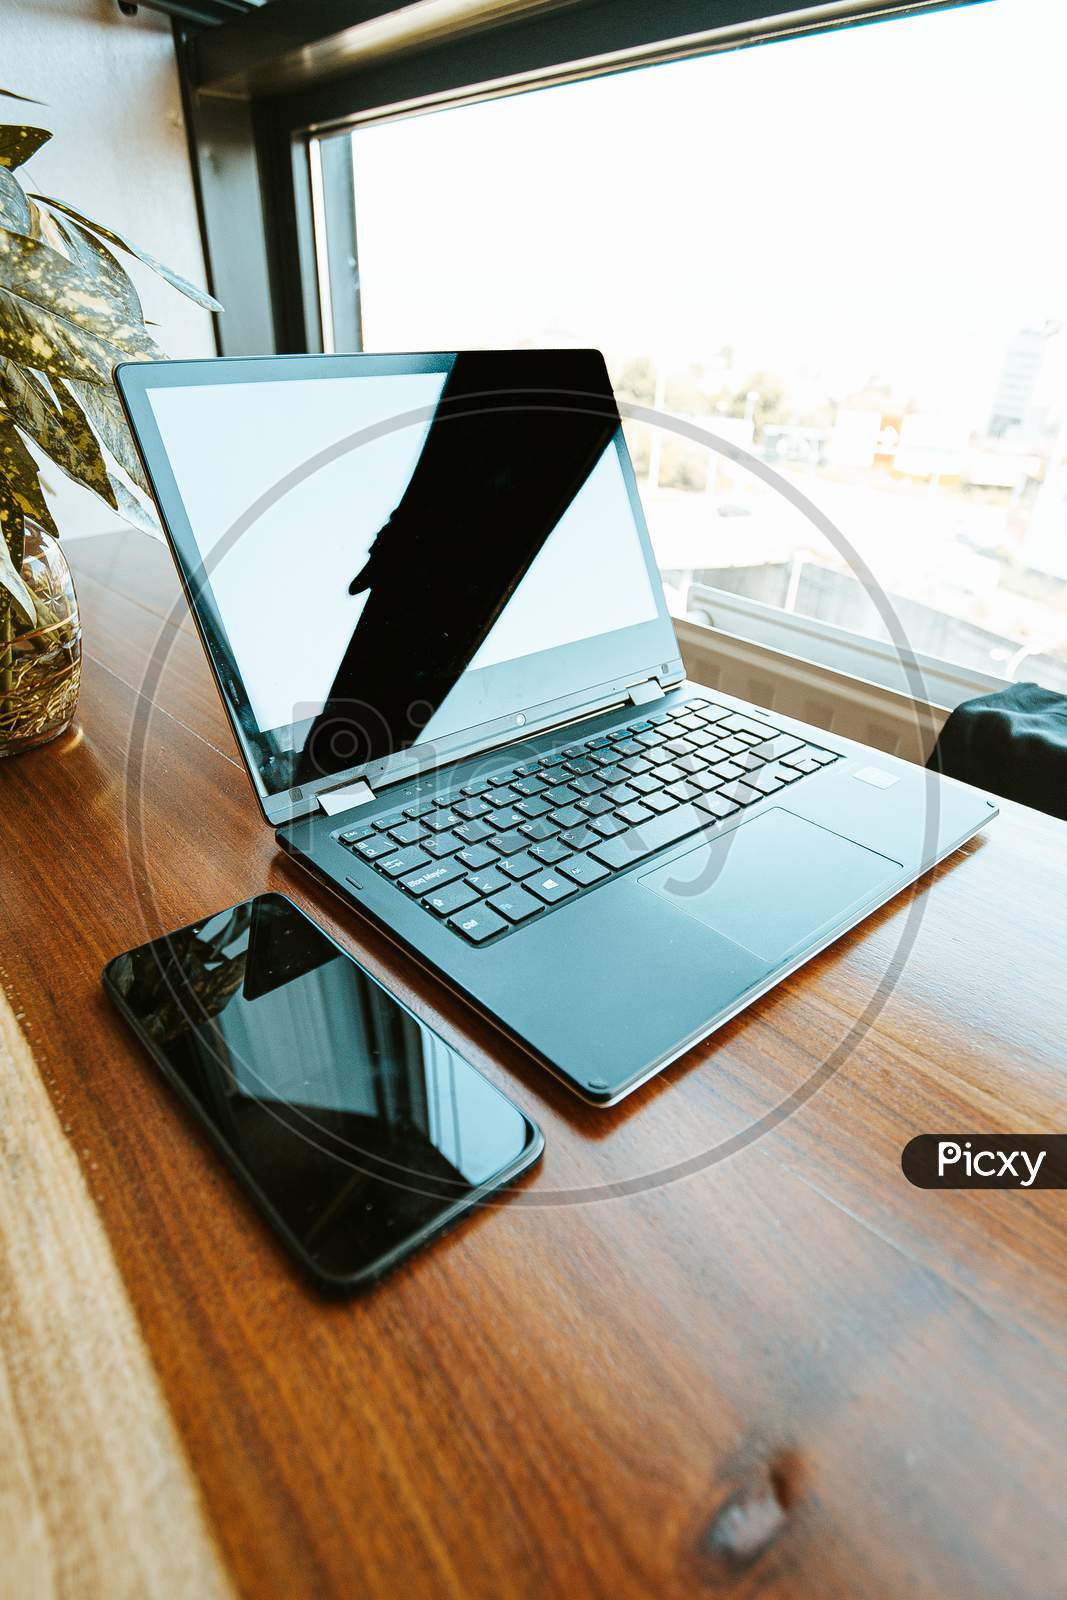 Work Space Composition With A Black Mobile Phone And A Black Laptop